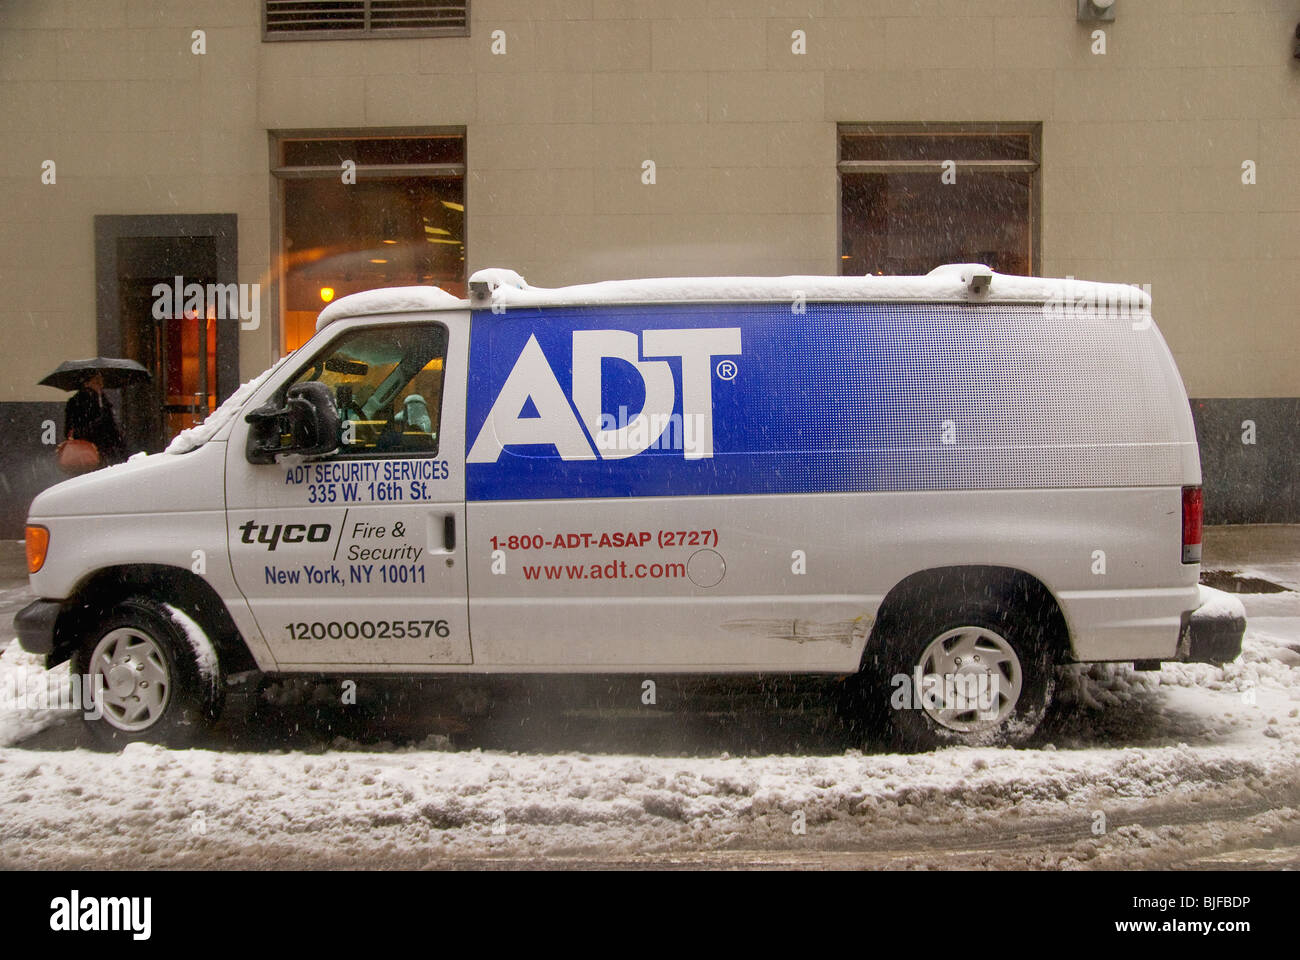 ADT Security Services, Corporate Truck, New York City Stock Photo